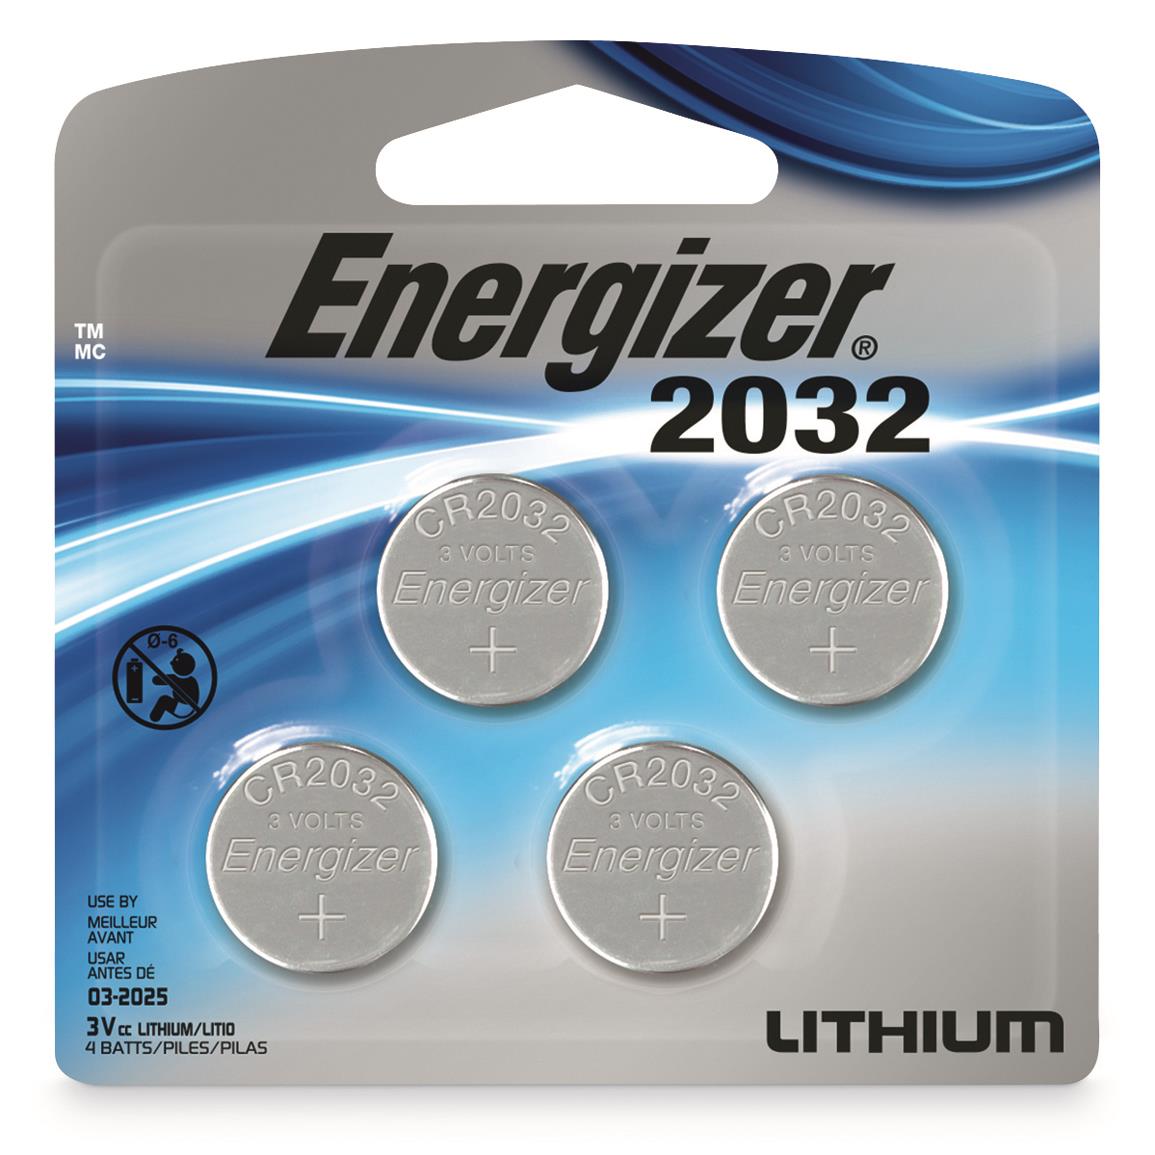 Energizer Lithium Coin 2032 Batteries, 4 Pack